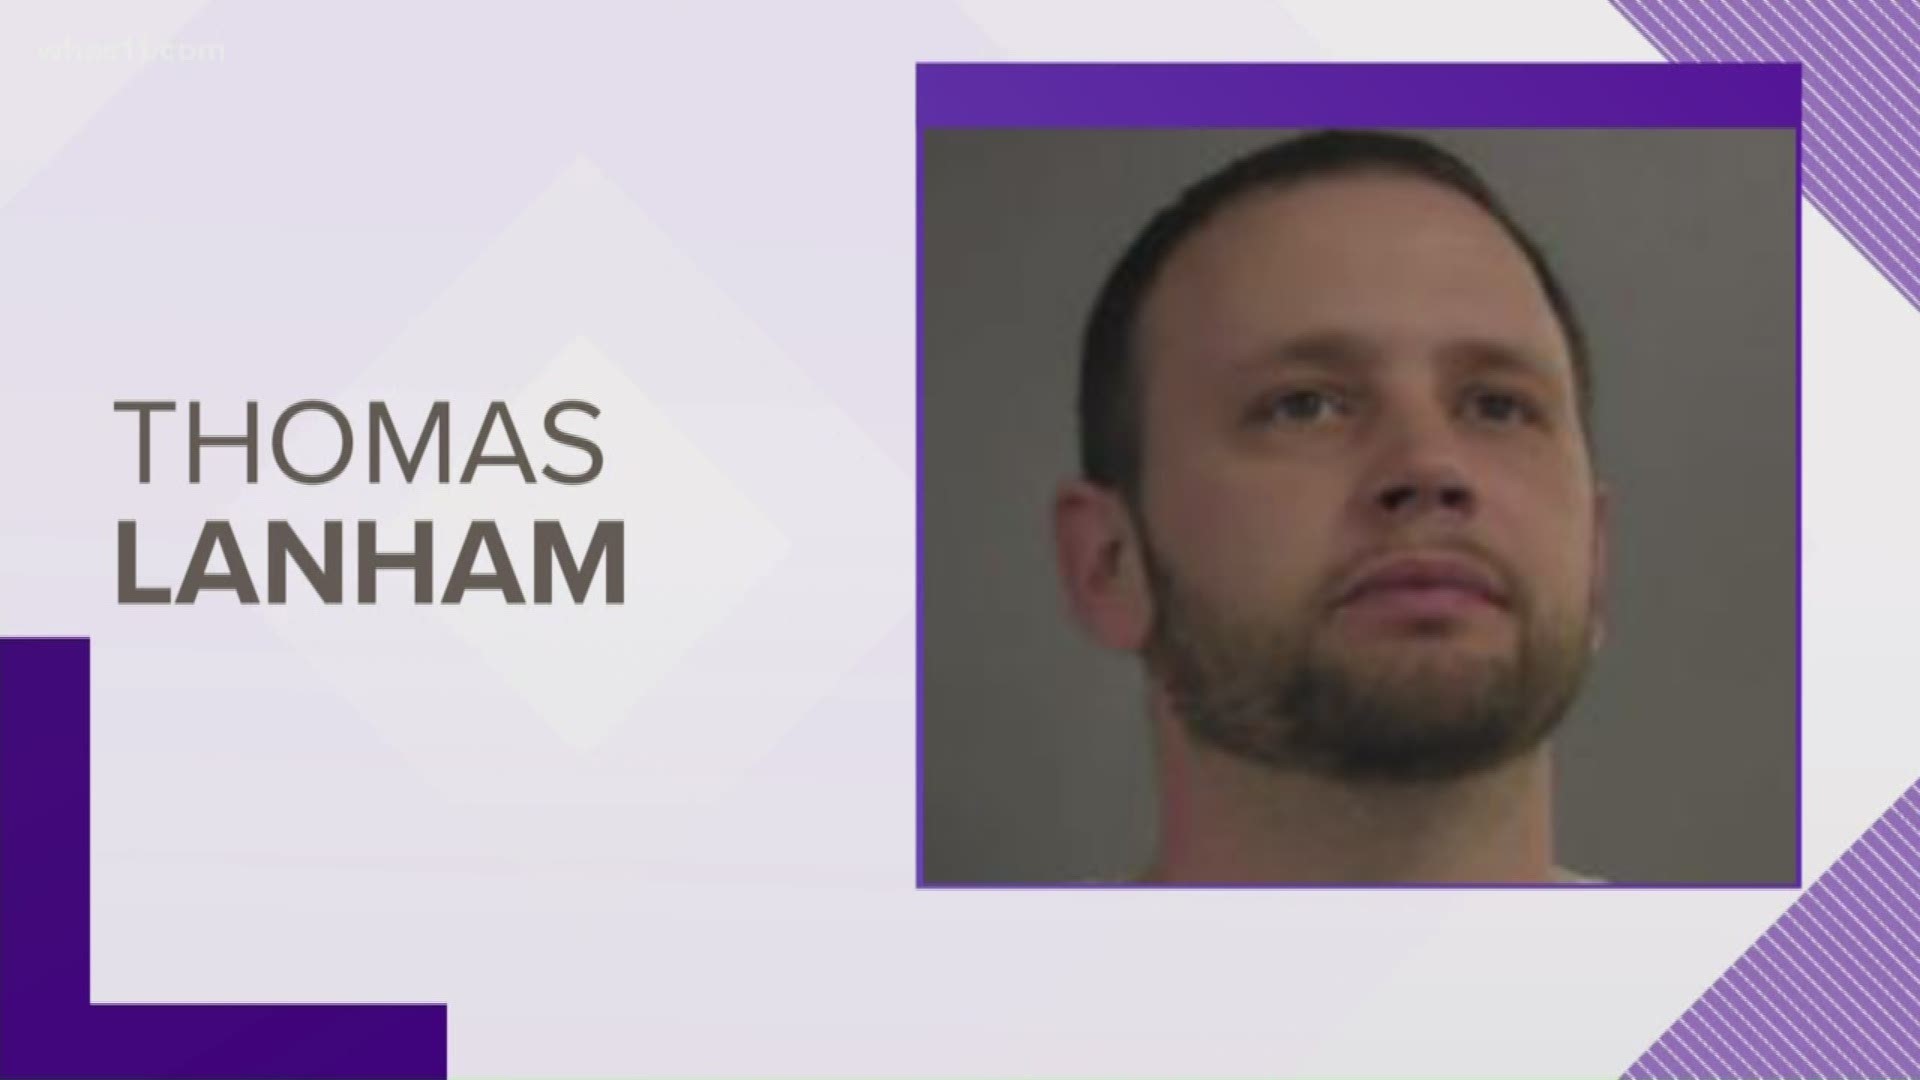 35-year-old Thomas Lanham was charged in connection to the murders of Teressa McCoy and Austin Gamez.